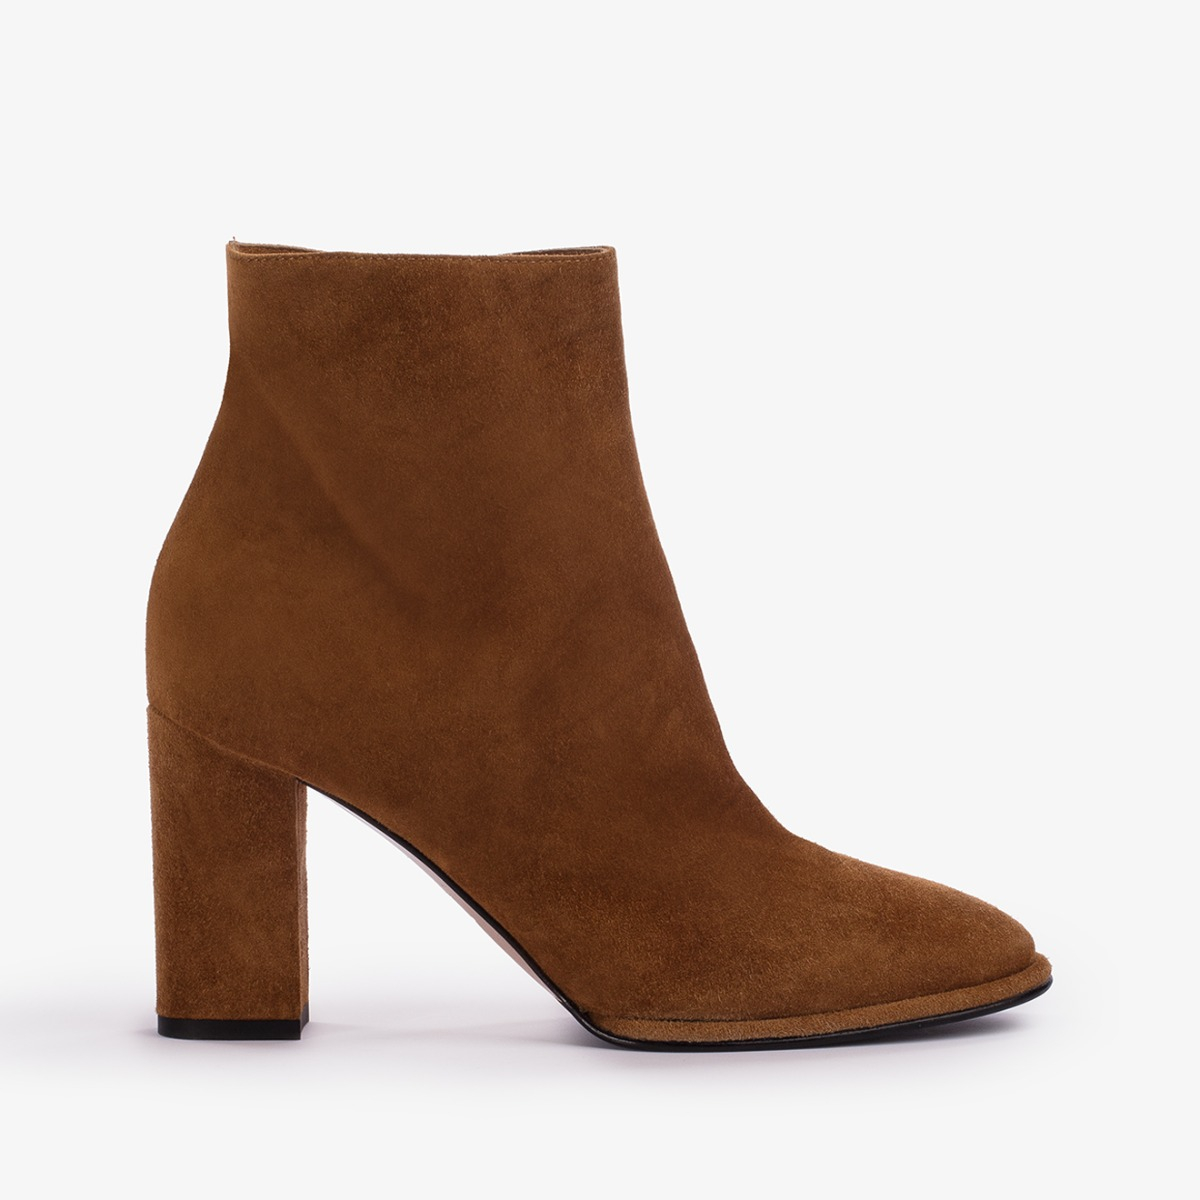 ELSA ANKLE BOOT 90 mm - Le Silla official outlet